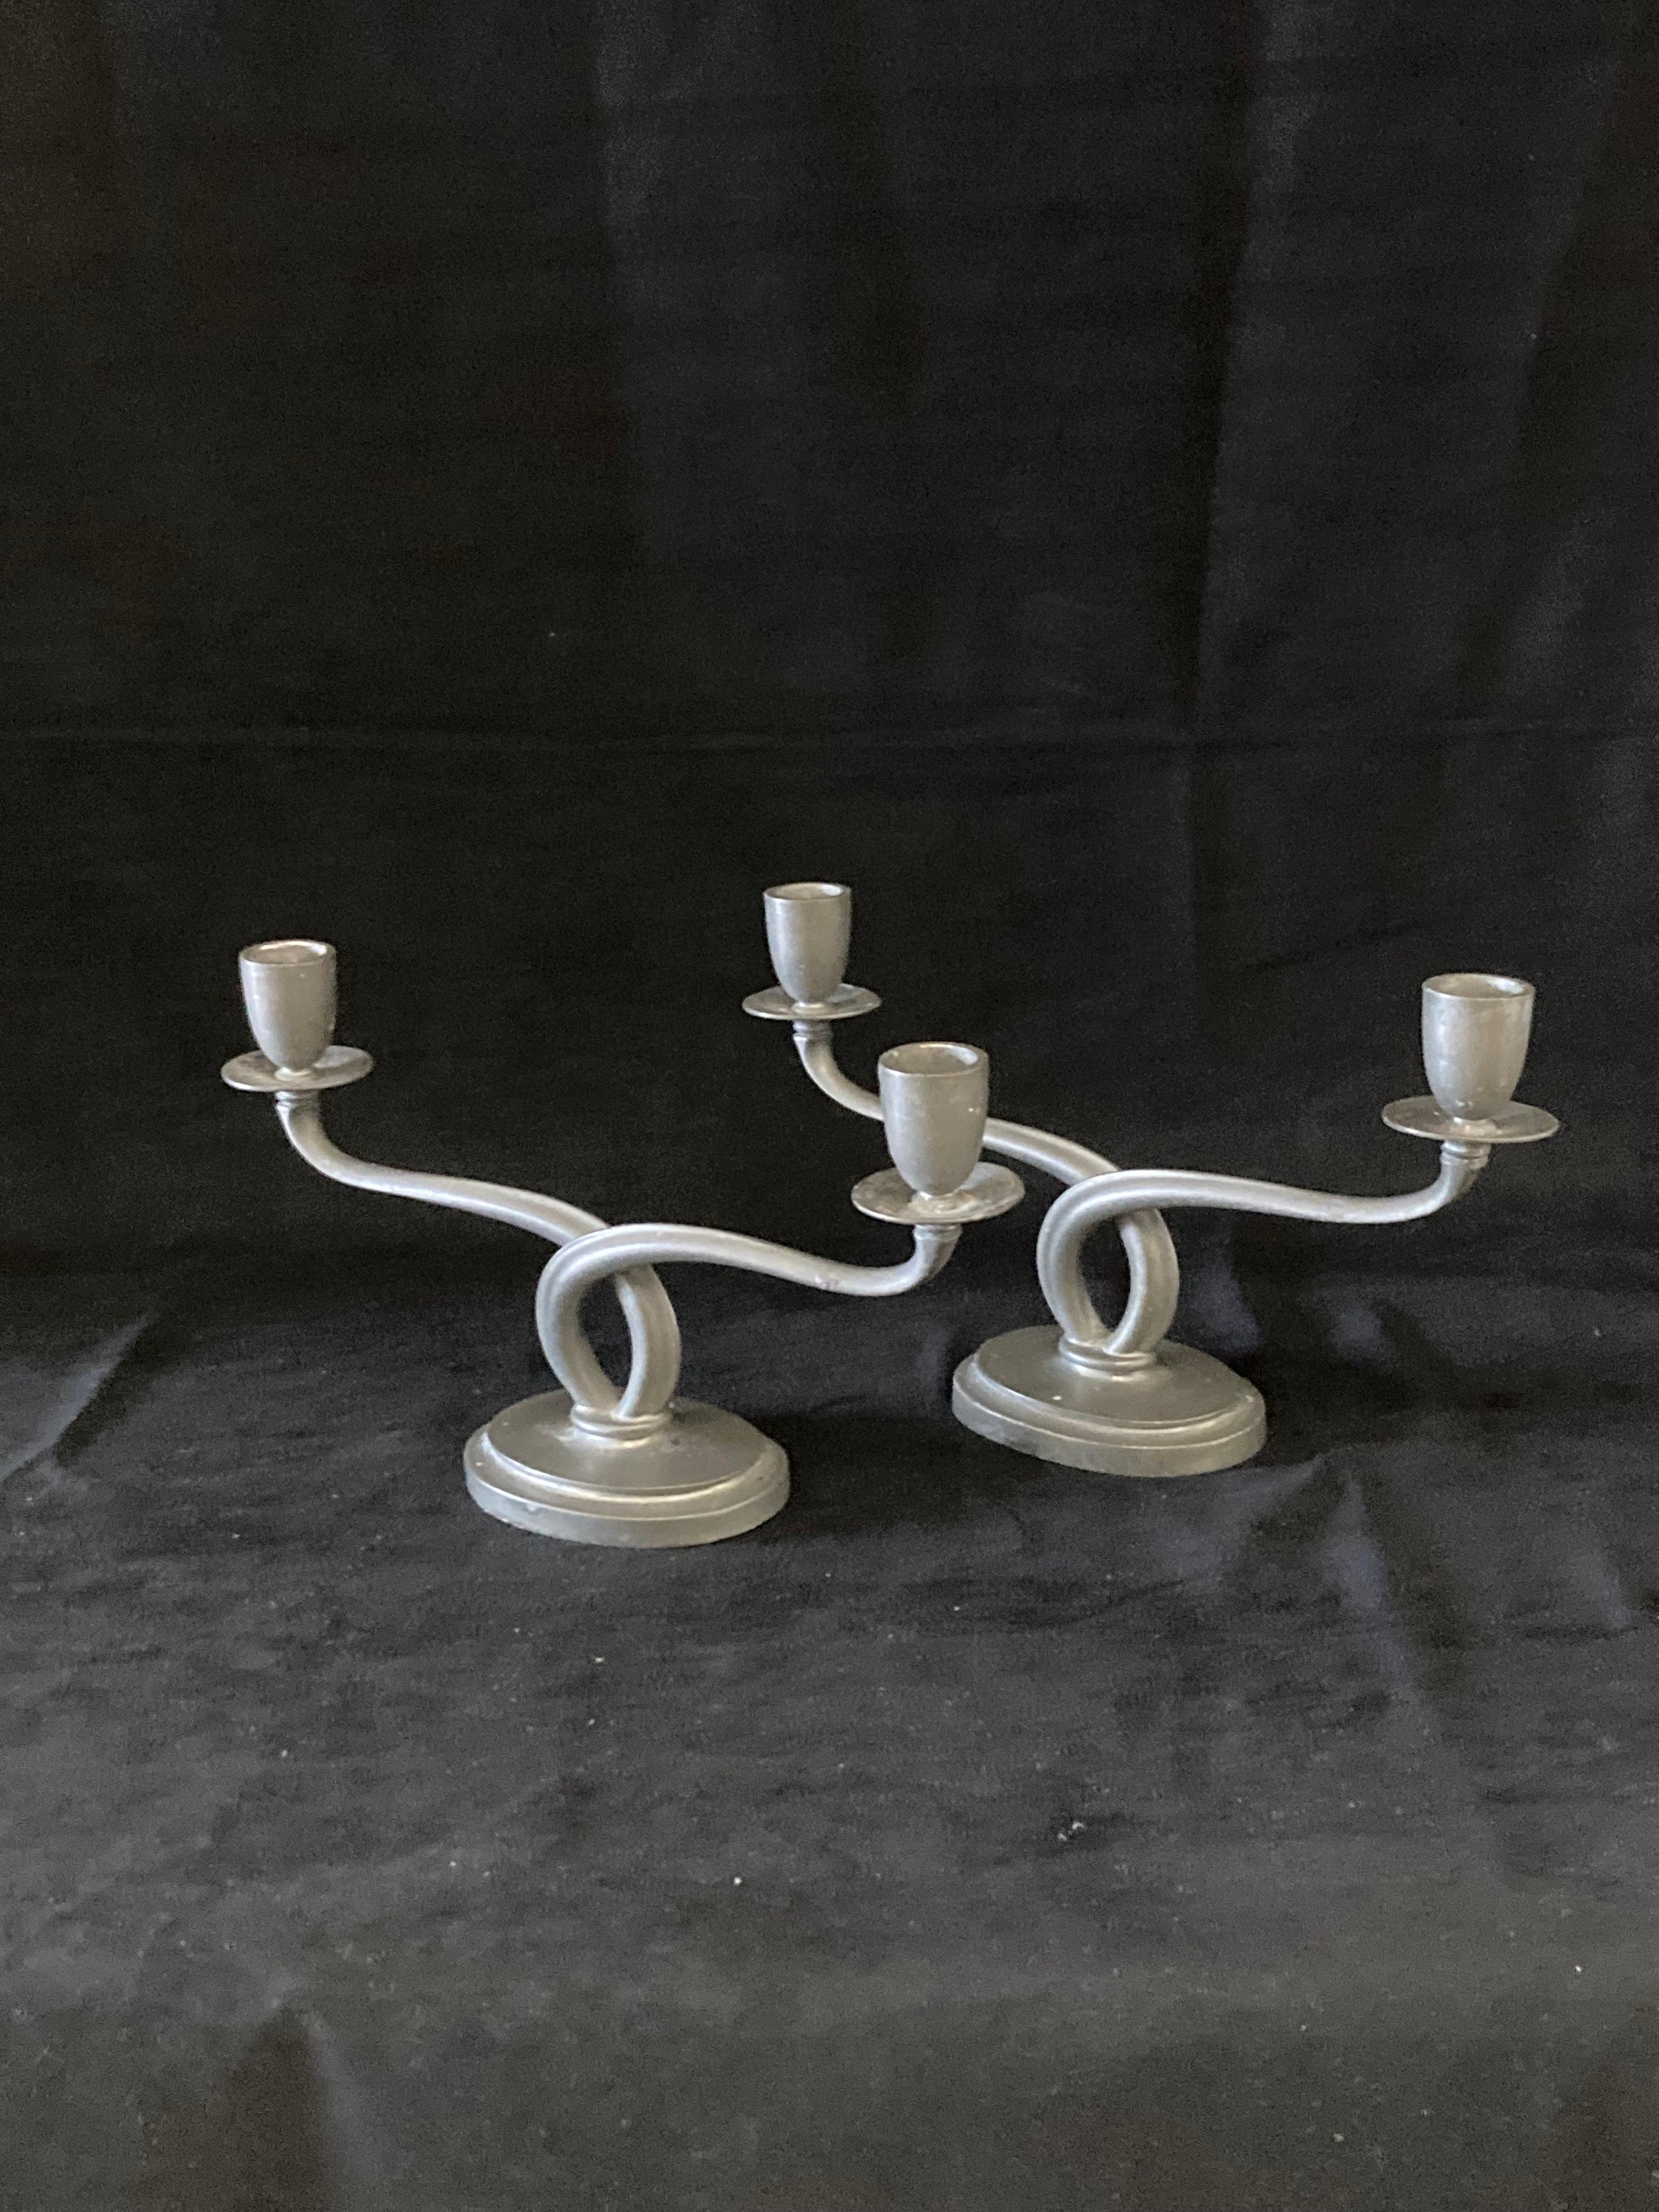 A pair of 1920s Arts and Crafts pewter candle holders designed by Just Andersen, Denmark.
The candle holders are in good vintage condition and marked with Just Andersen's triangle mark as well as with the model number - 1799.

Just Andersen